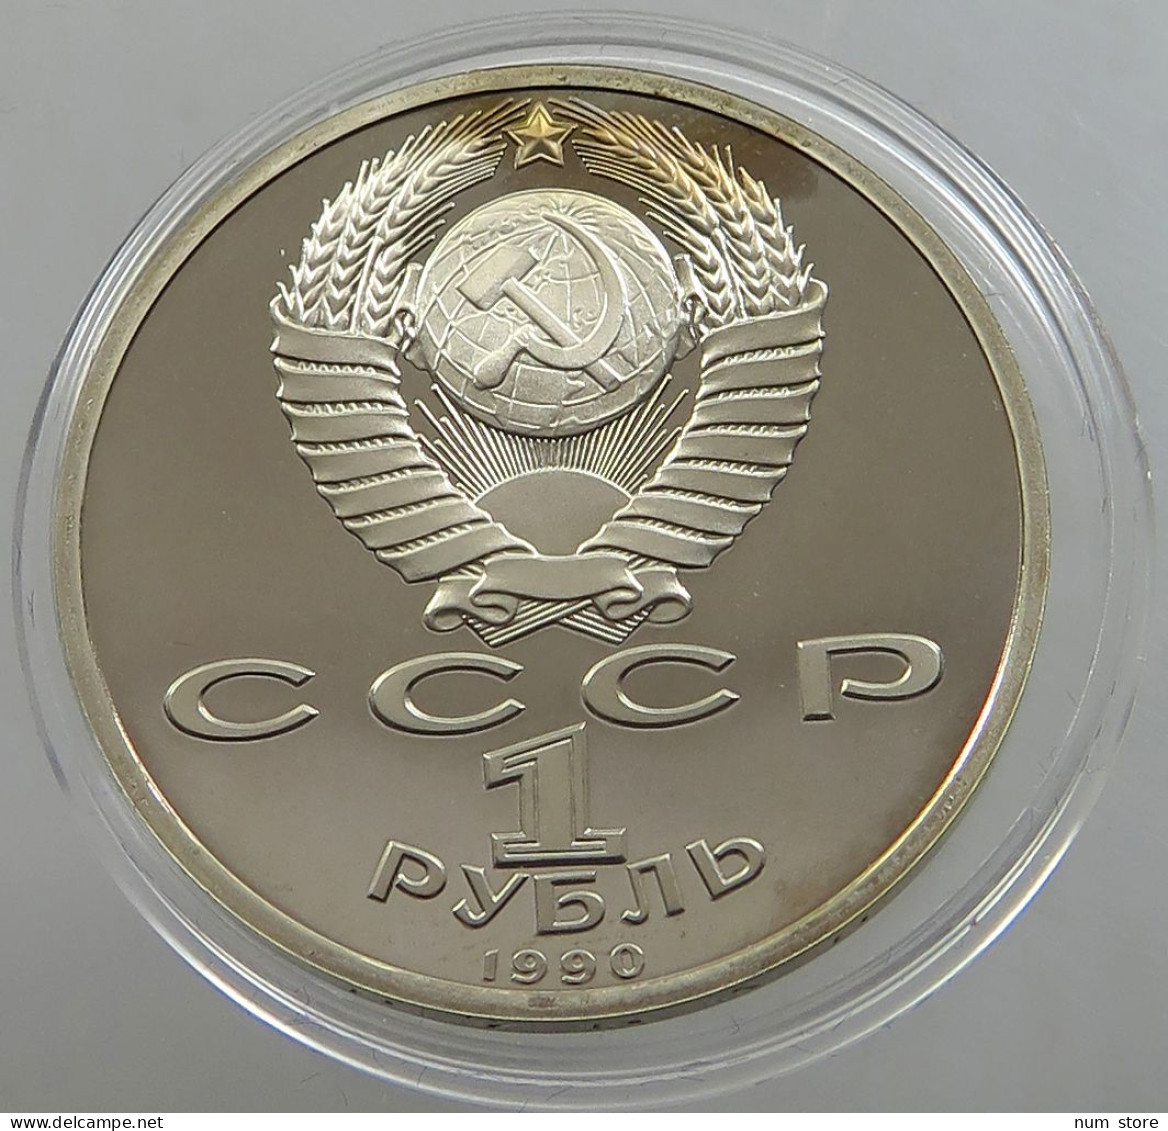 RUSSIA USSR 1 ROUBLE 1990 ZHUKOV PROOF #sm14 0751 - Rusland